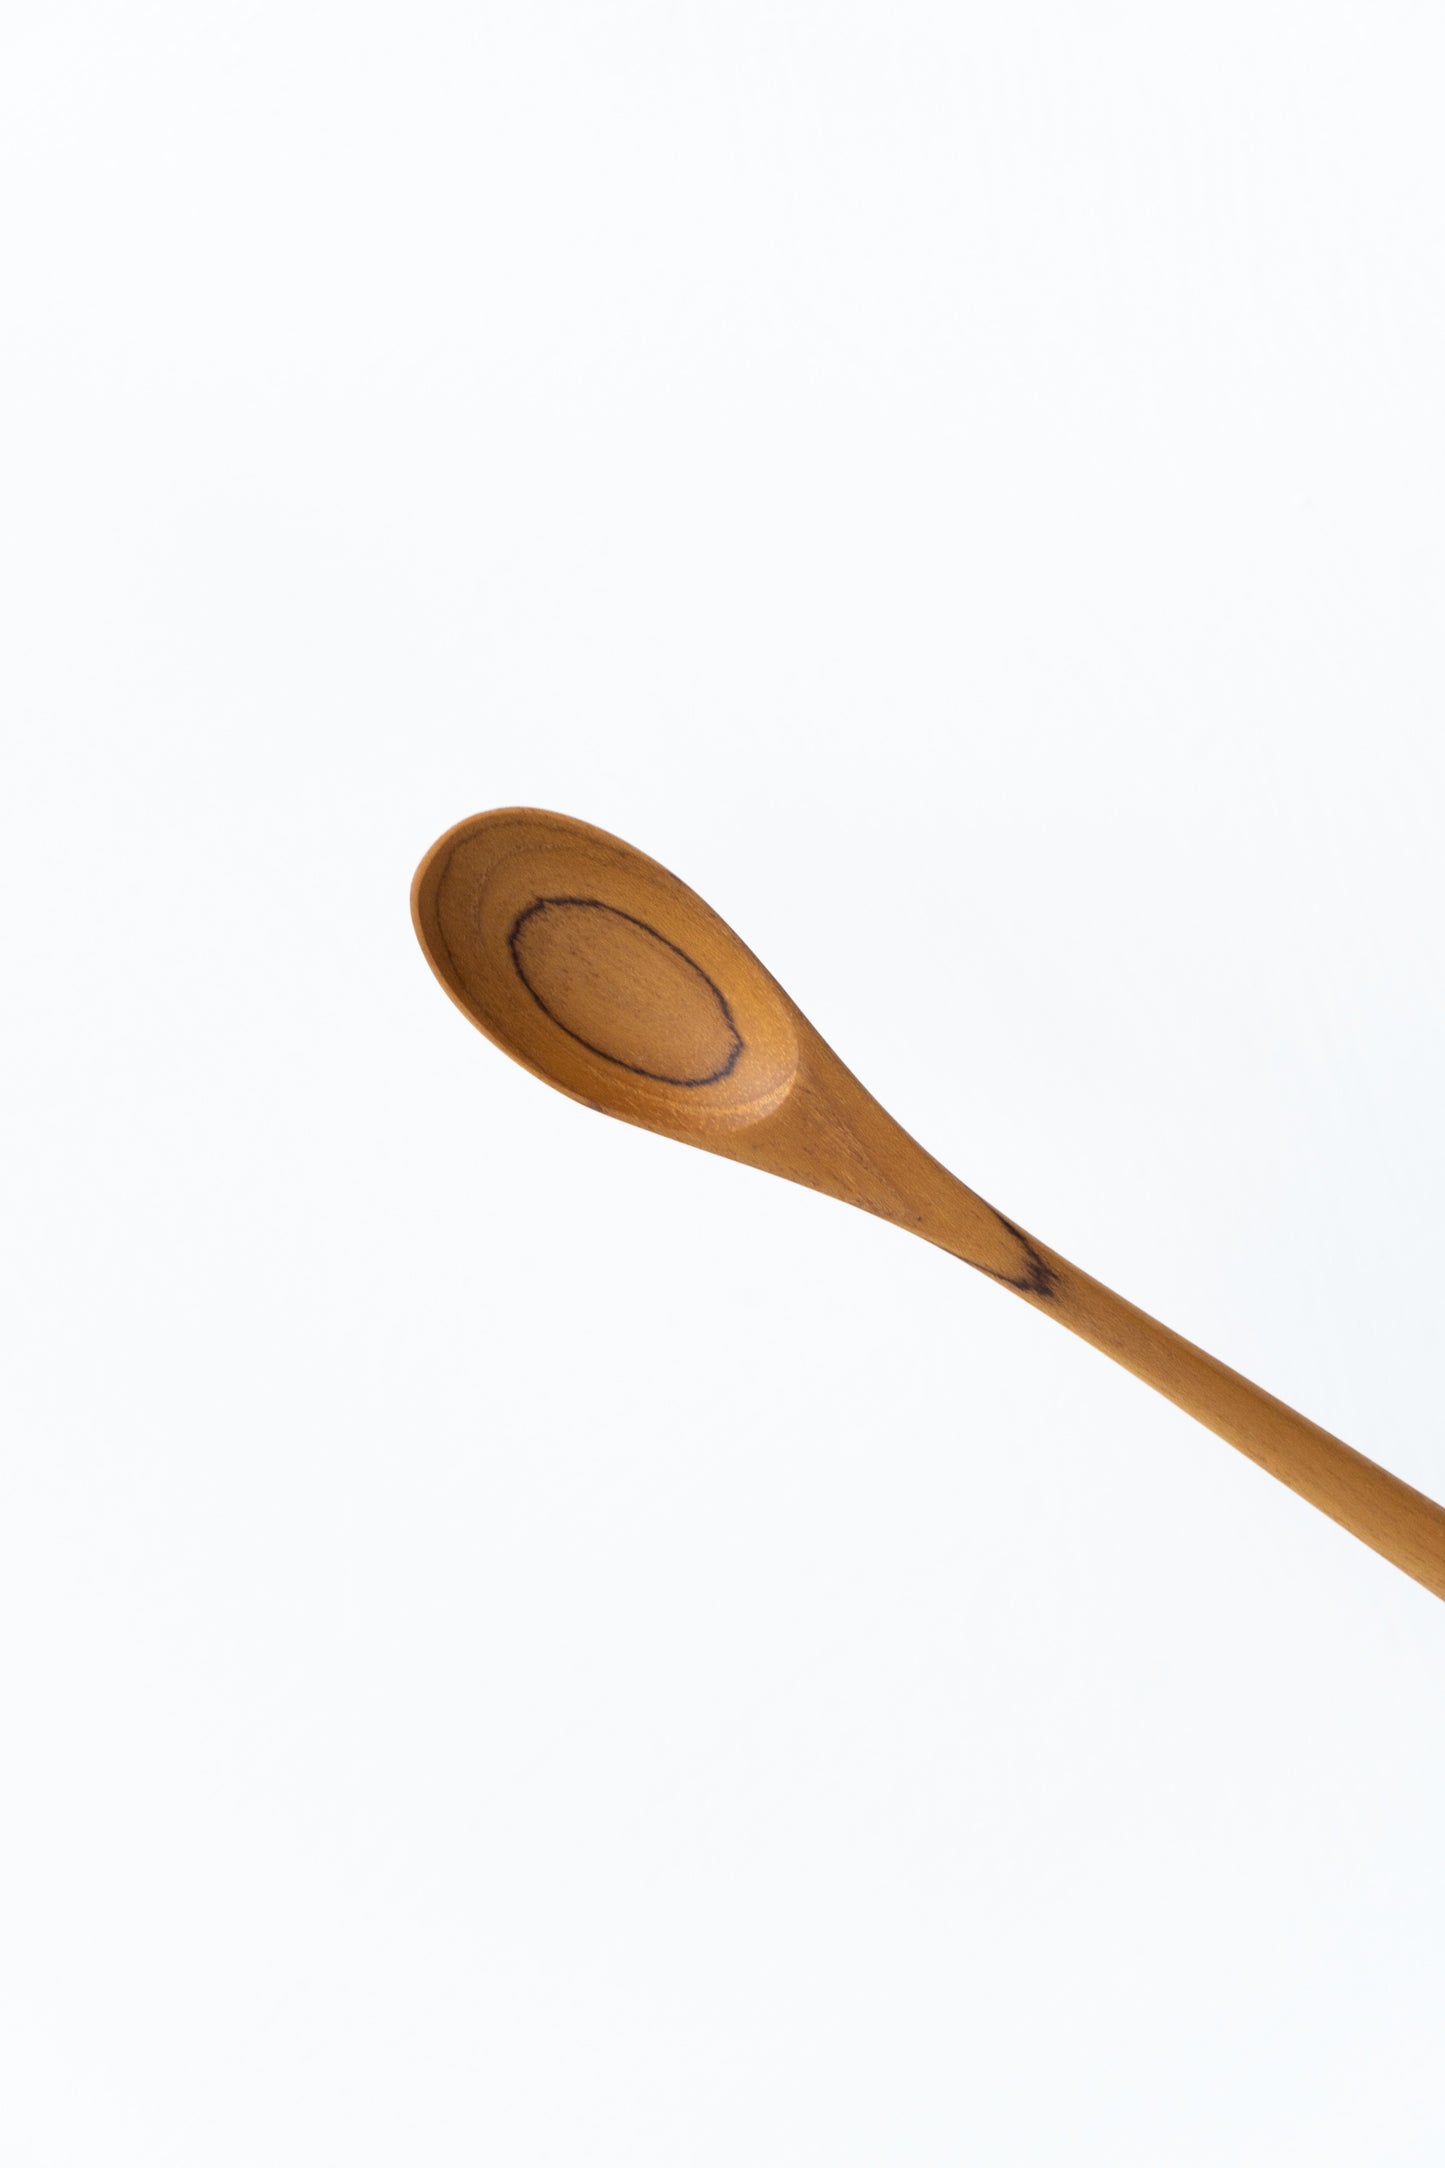 Details of the Juice Spoon Reclaimed Teak (set of 4) by The Loft Selects.